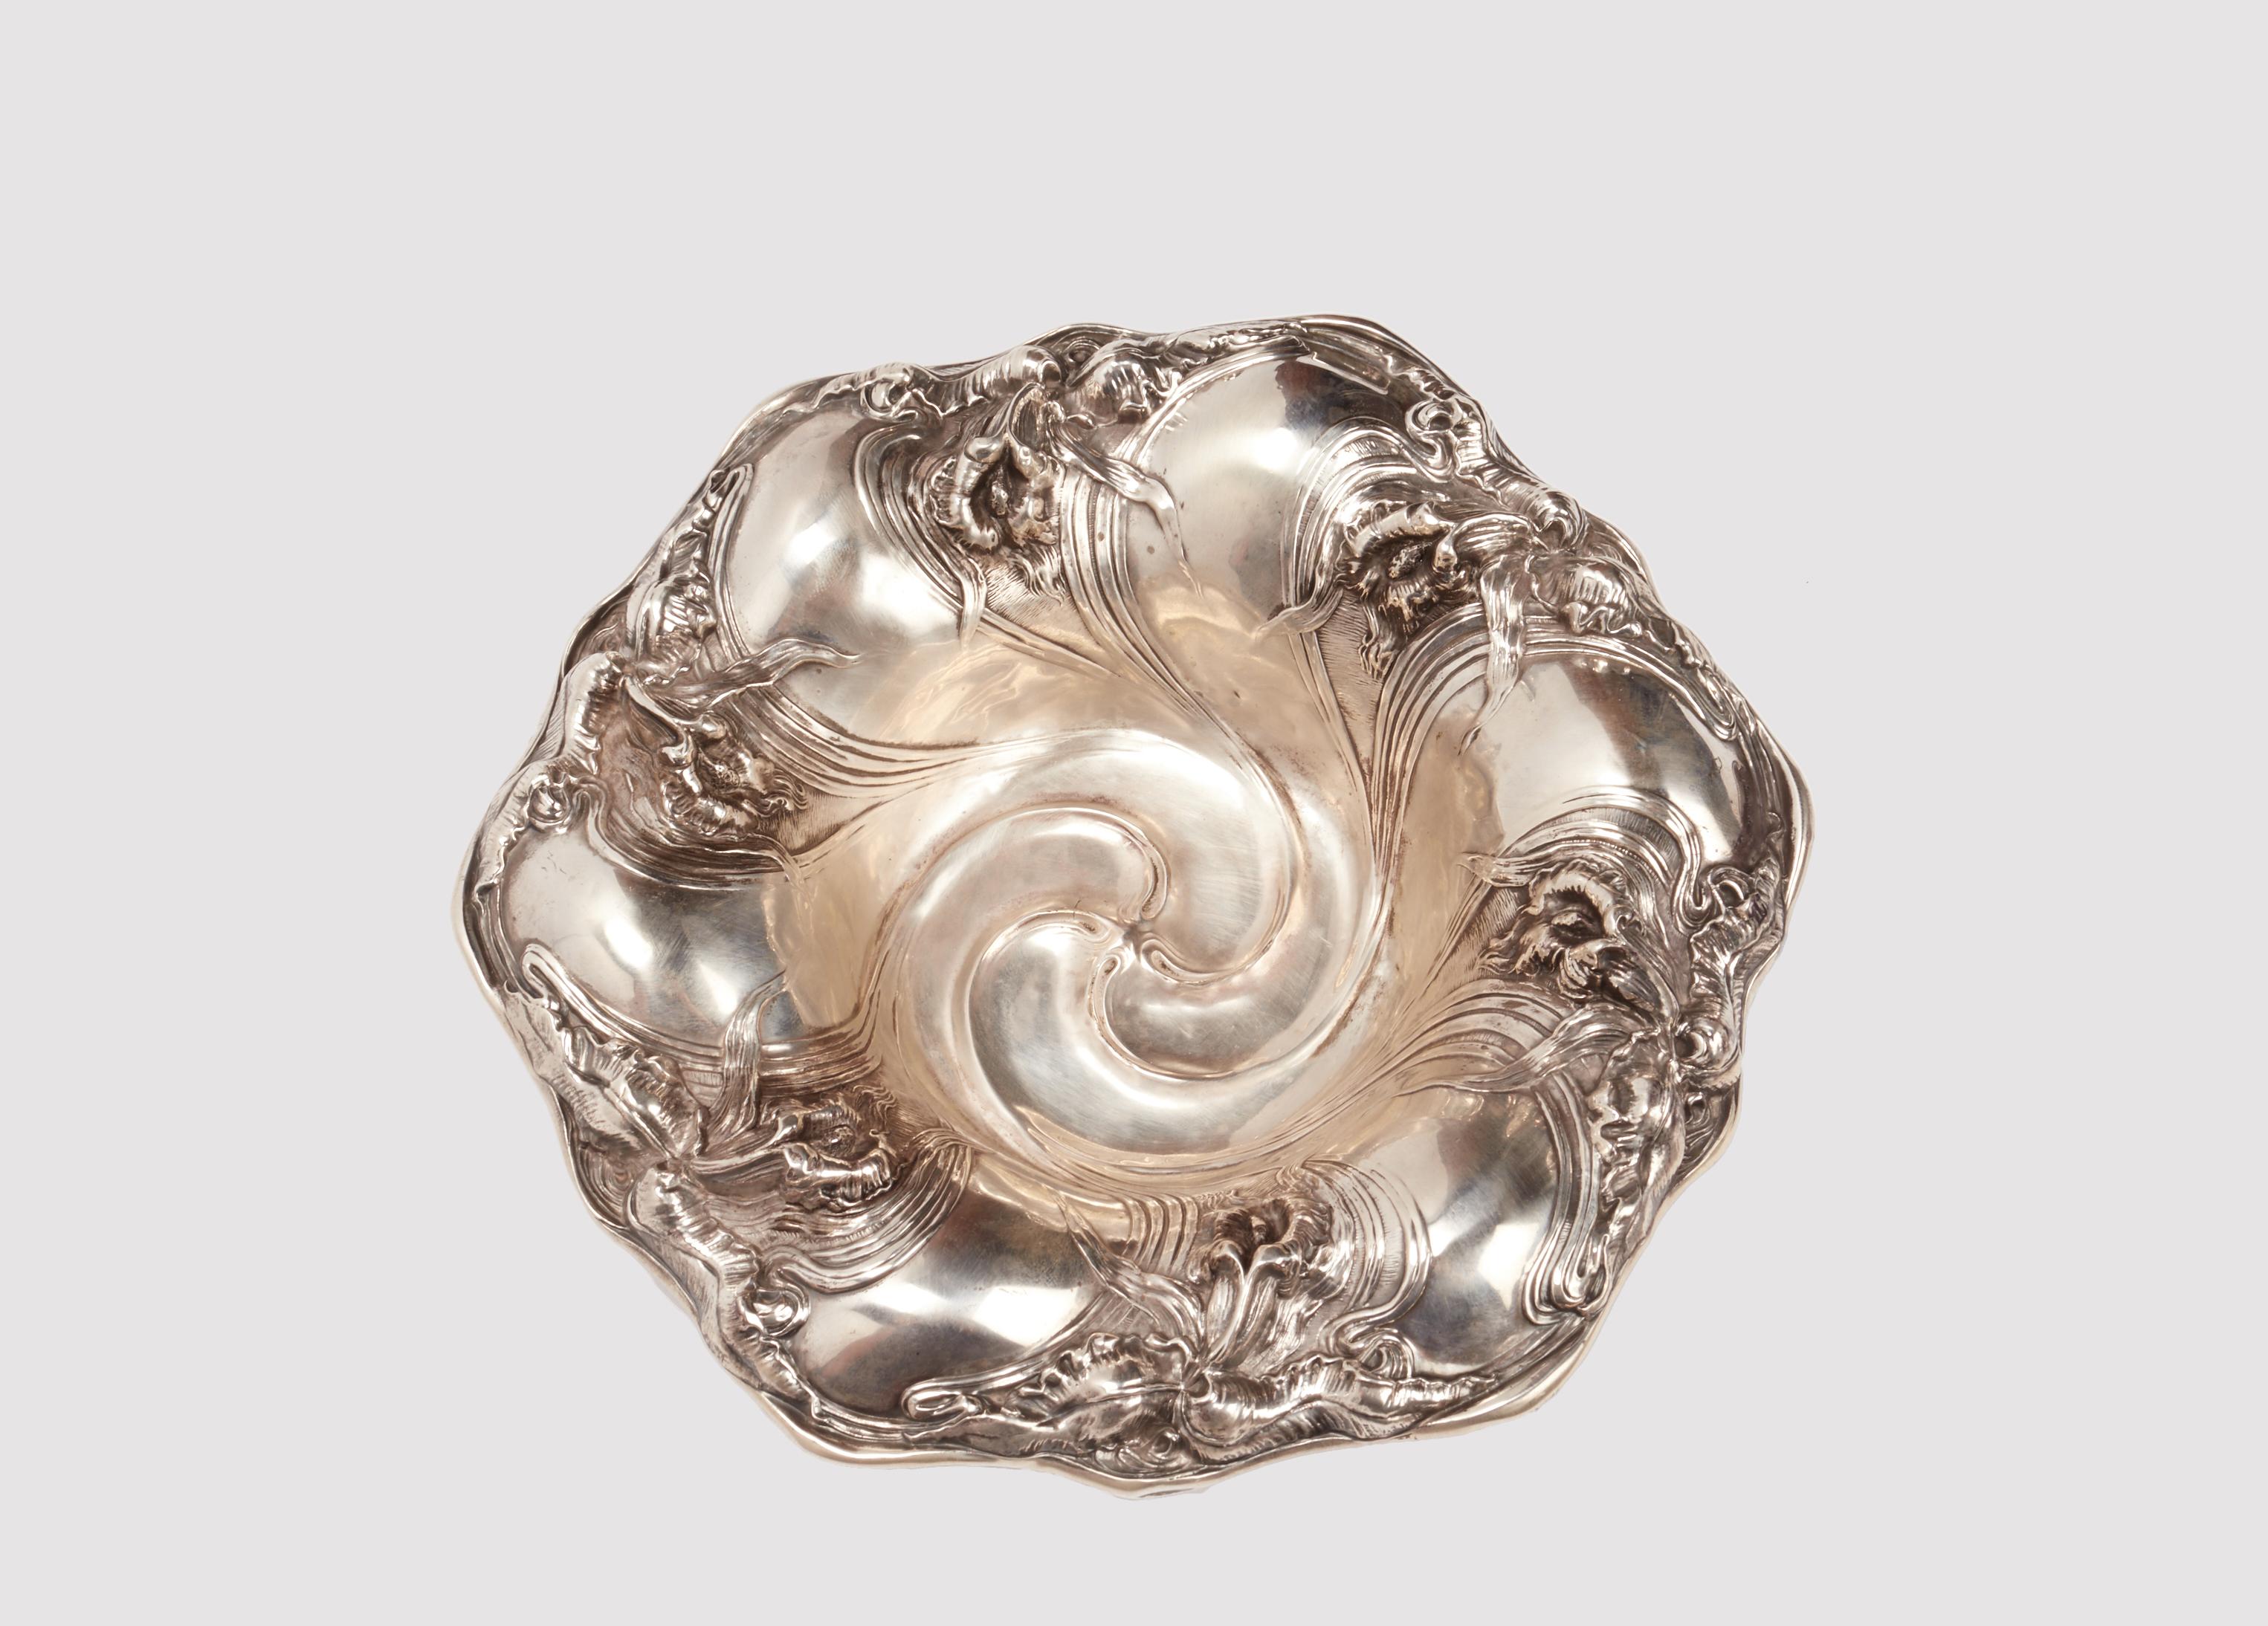 Art Nouveau sterling silver bowl, round shape. The repoussé decoration is in purest Art Nouveau style, depicting orchids. Unger Broters, Newark, New Jersey. United States circa 1890. 